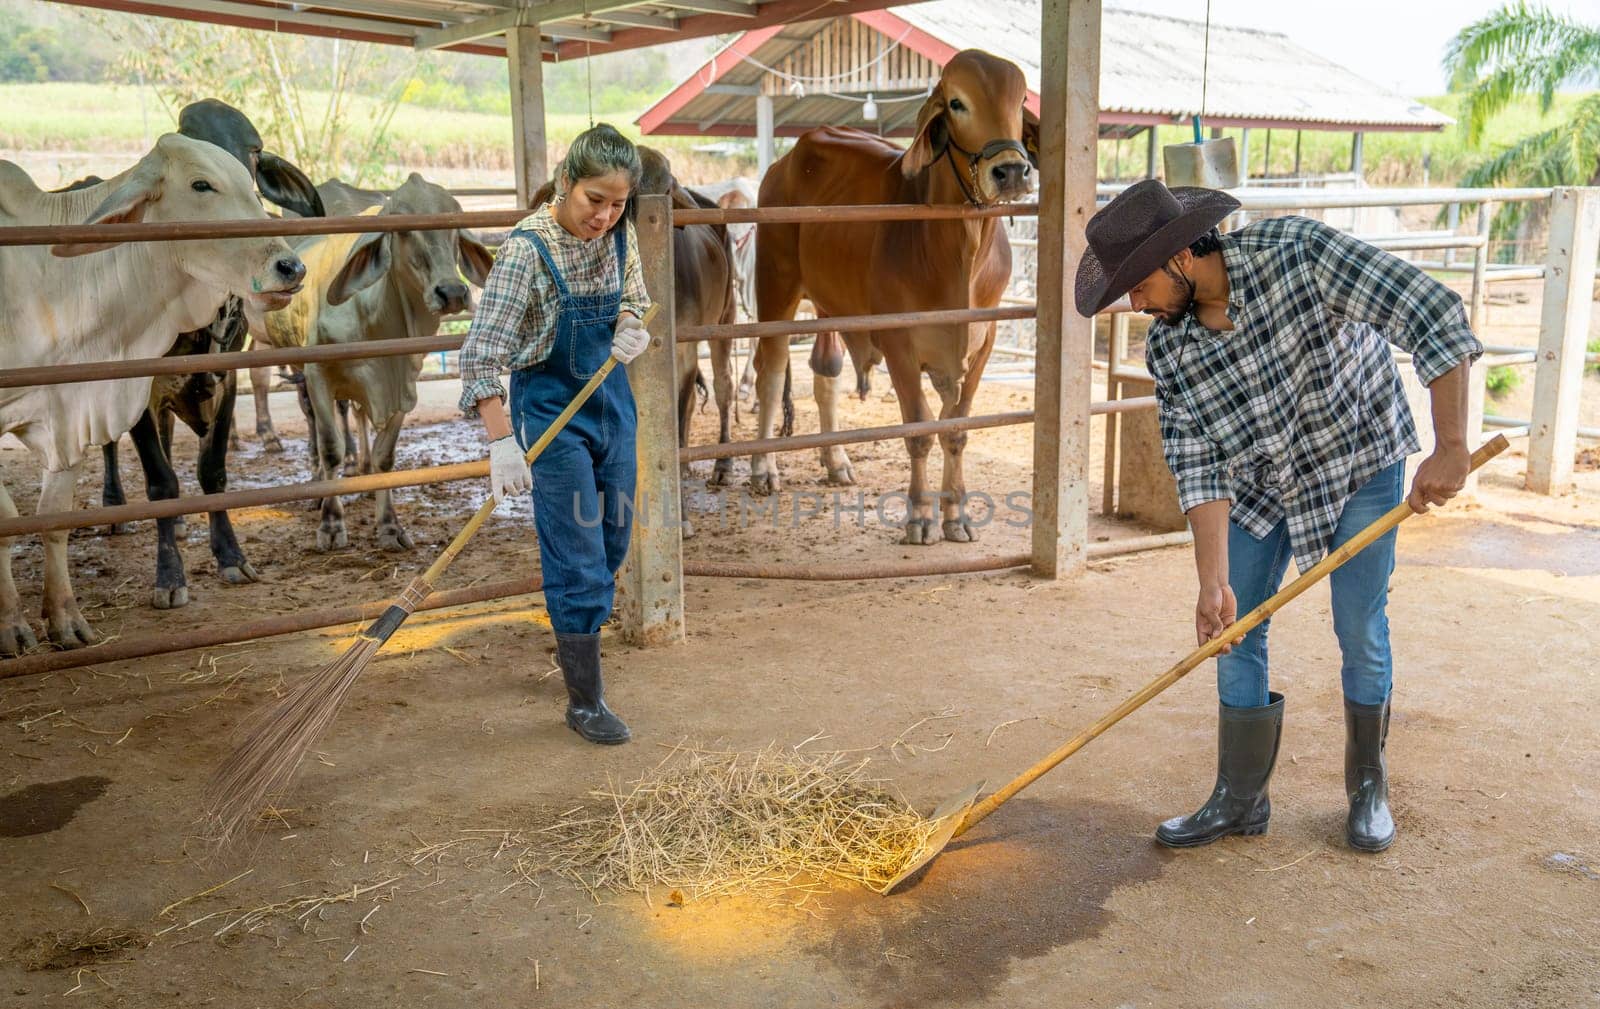 Asian man and woman farmers use bloom and tools to clean cow stable together in their farm with day light.